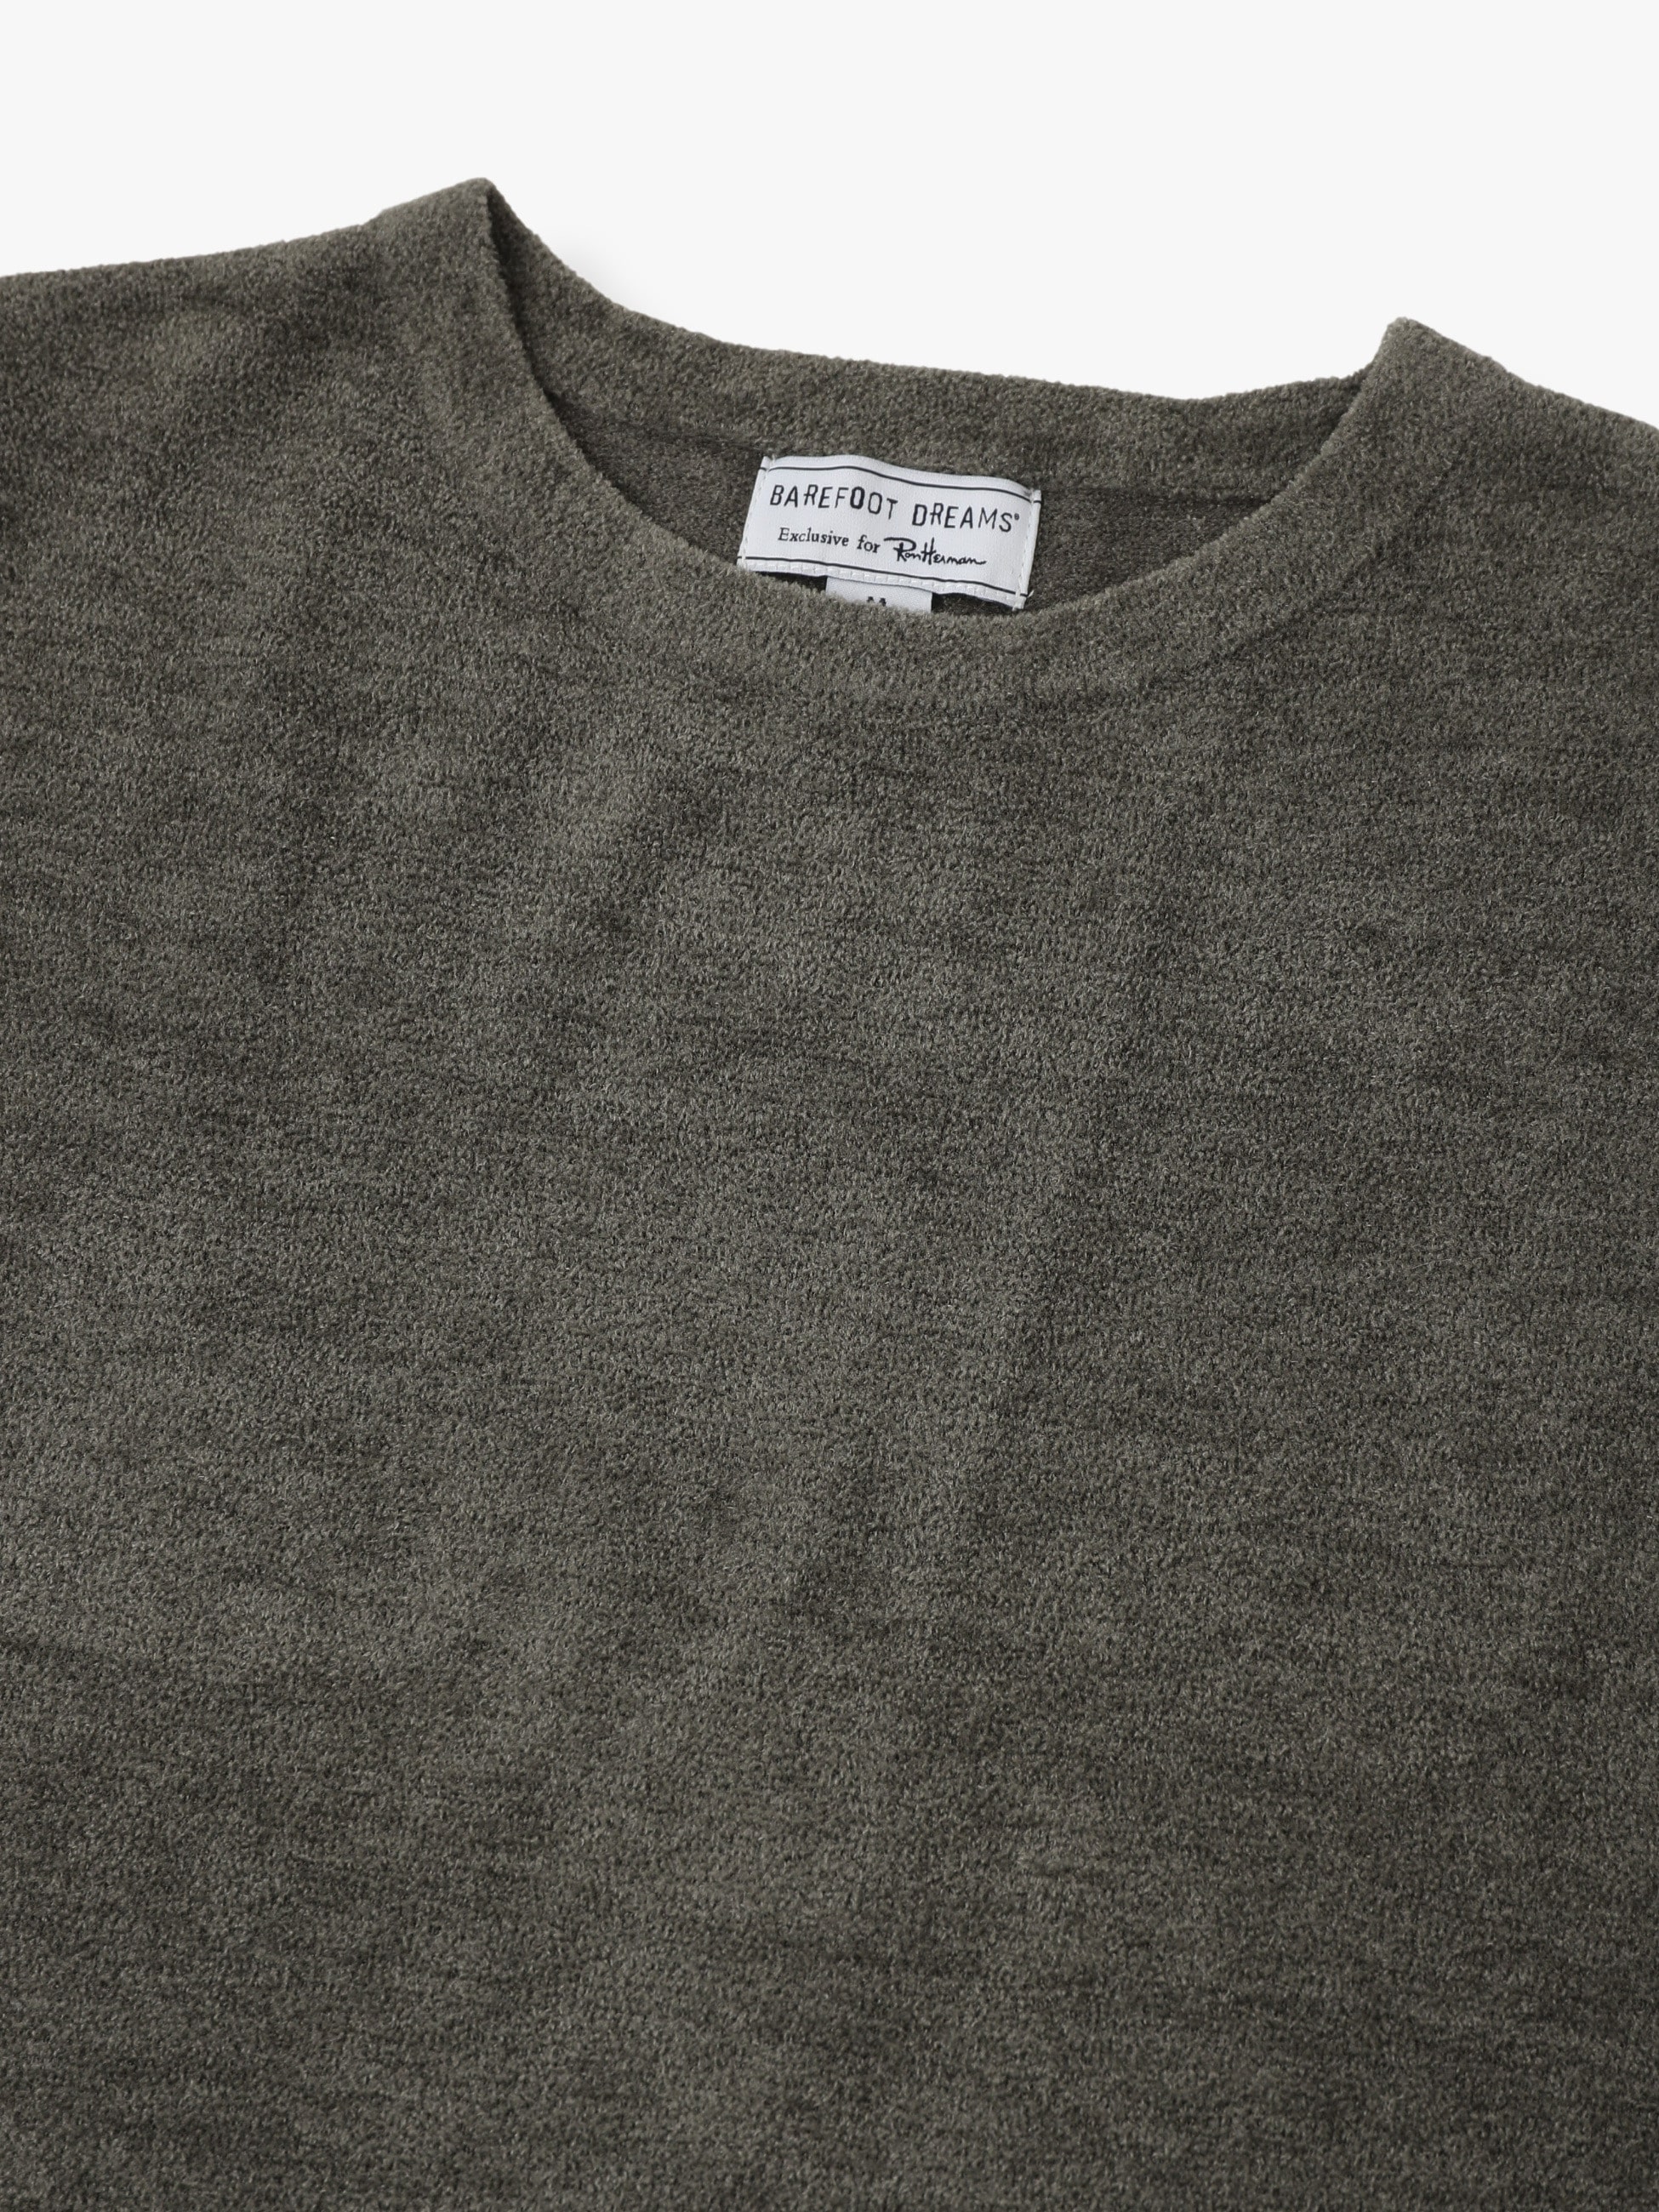 CozyChic Ultra Lite Crew Neck Tee｜BAREFOOT DREAMS for Ron Herman 